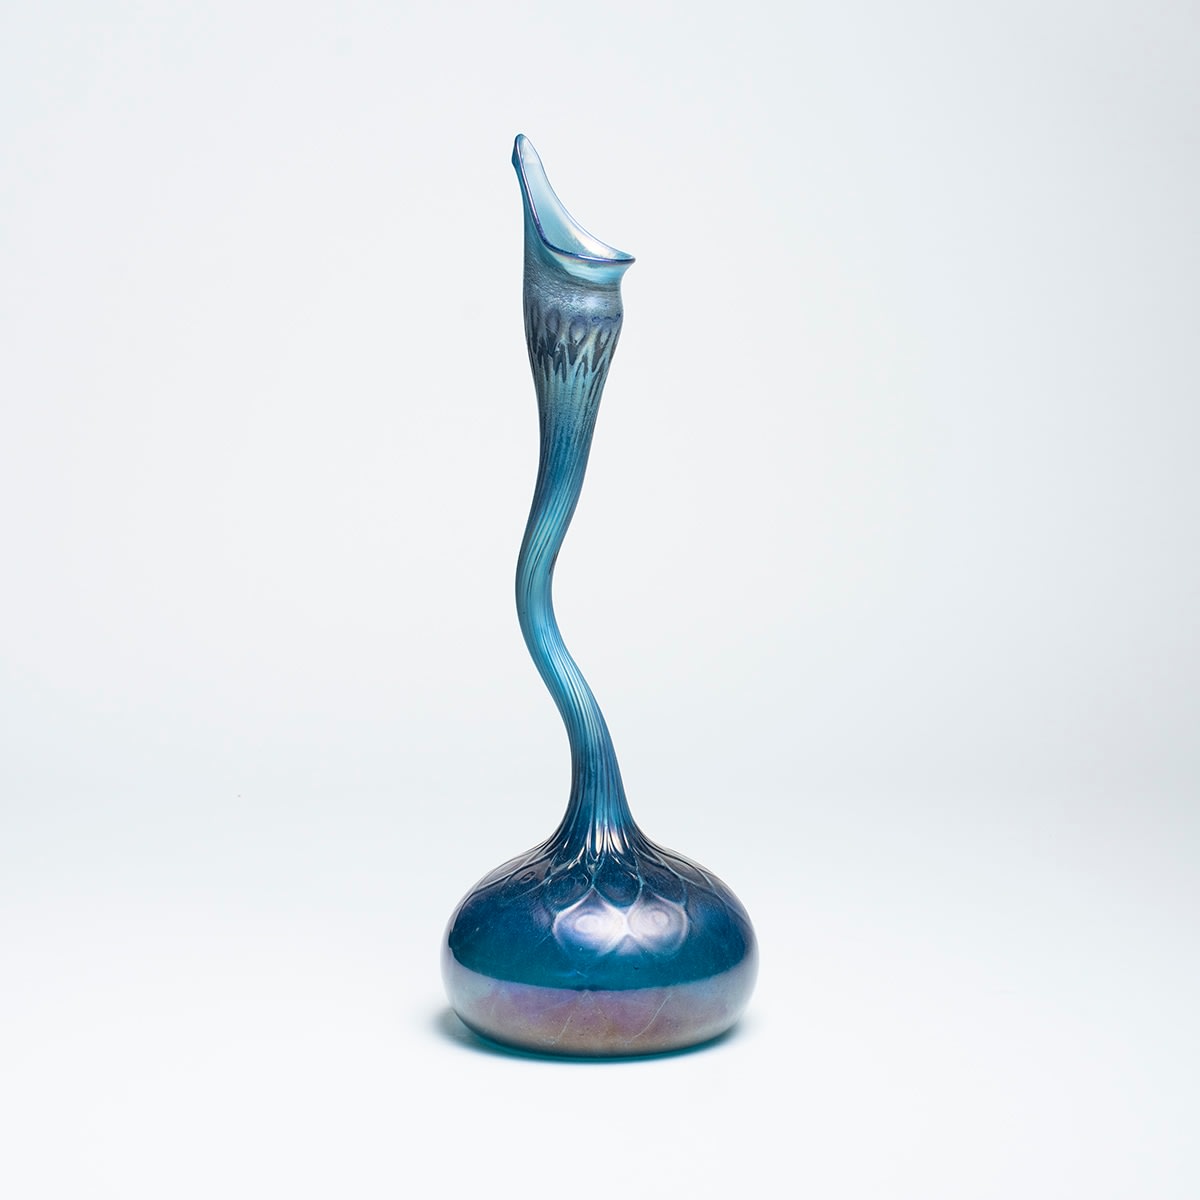 a blue iridescent gooseneck vase or rosewater sprinkler by tiffany studios in favrile glass, the form inspired by islamic historic glass